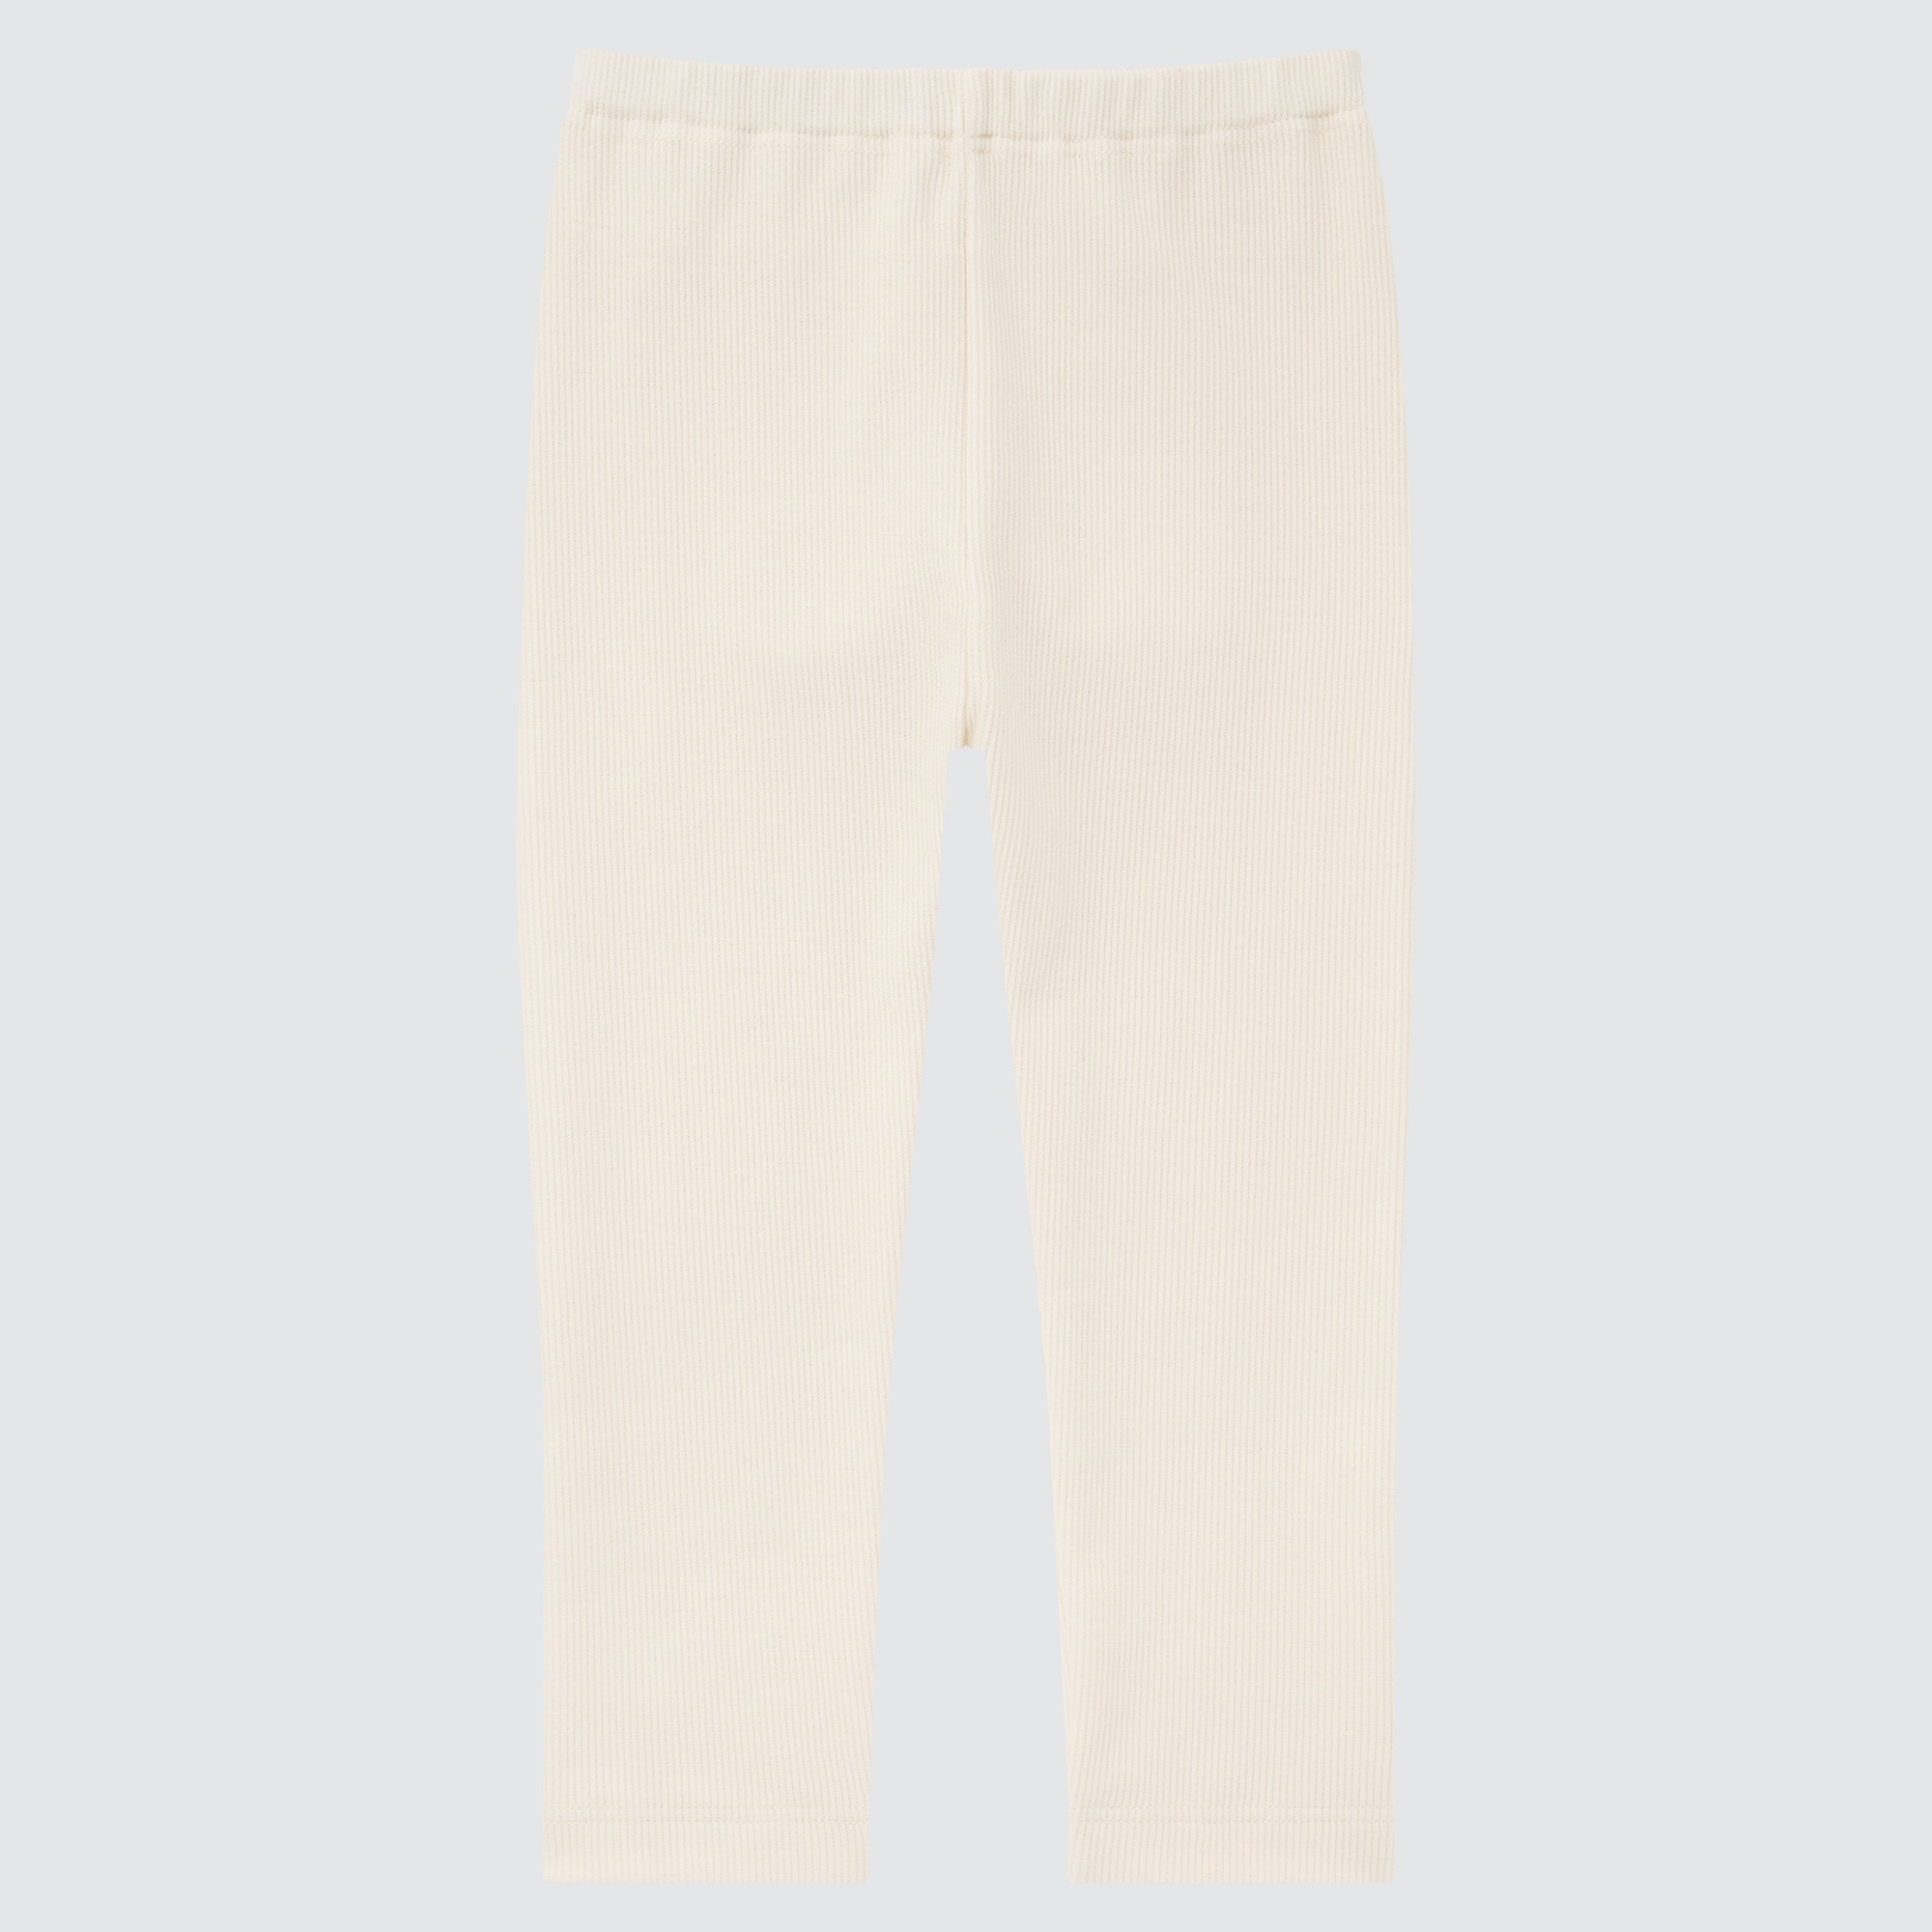 Uniqlo Women Stretch Double Face Straight Pants #bestsellers, Women's  Fashion, Bottoms on Carousell